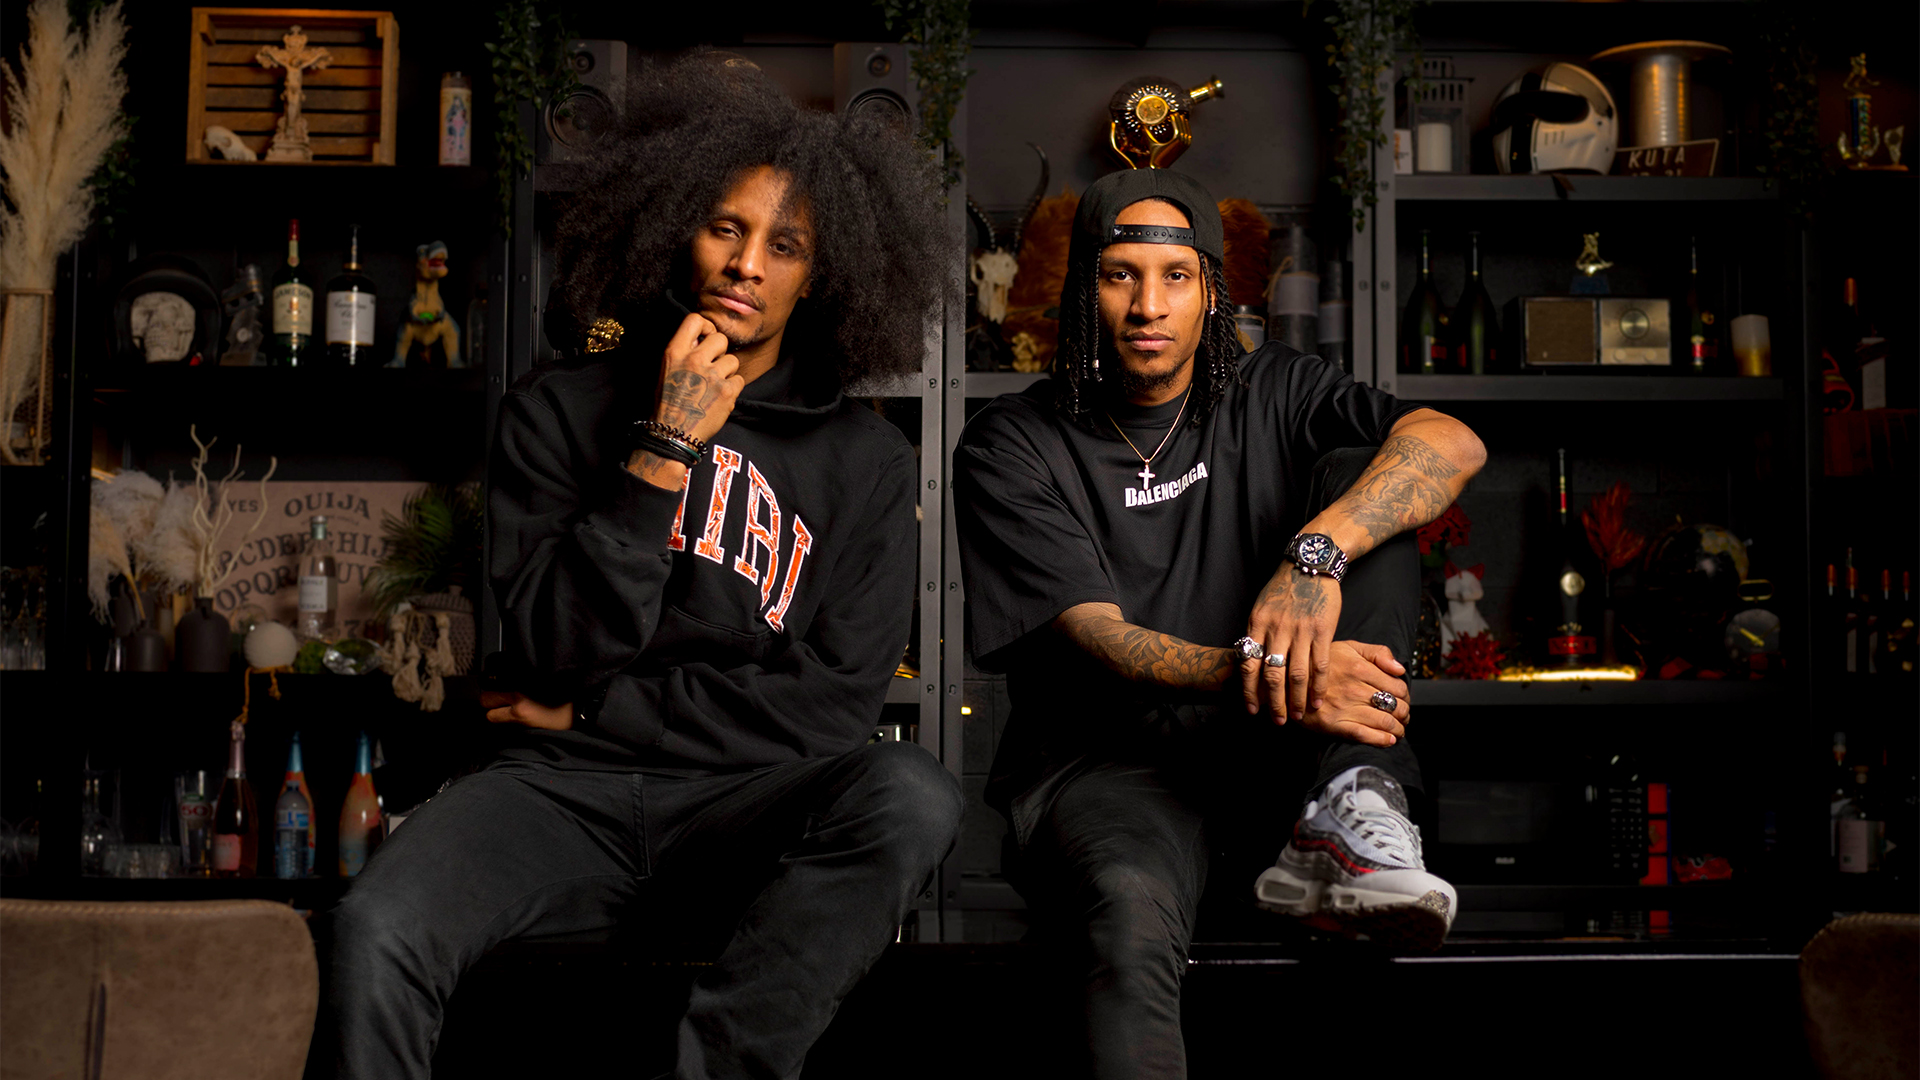 Les Twins Partner With KWN To Promote Literacy And Improve Children's Mental Wellbeing Through Dance